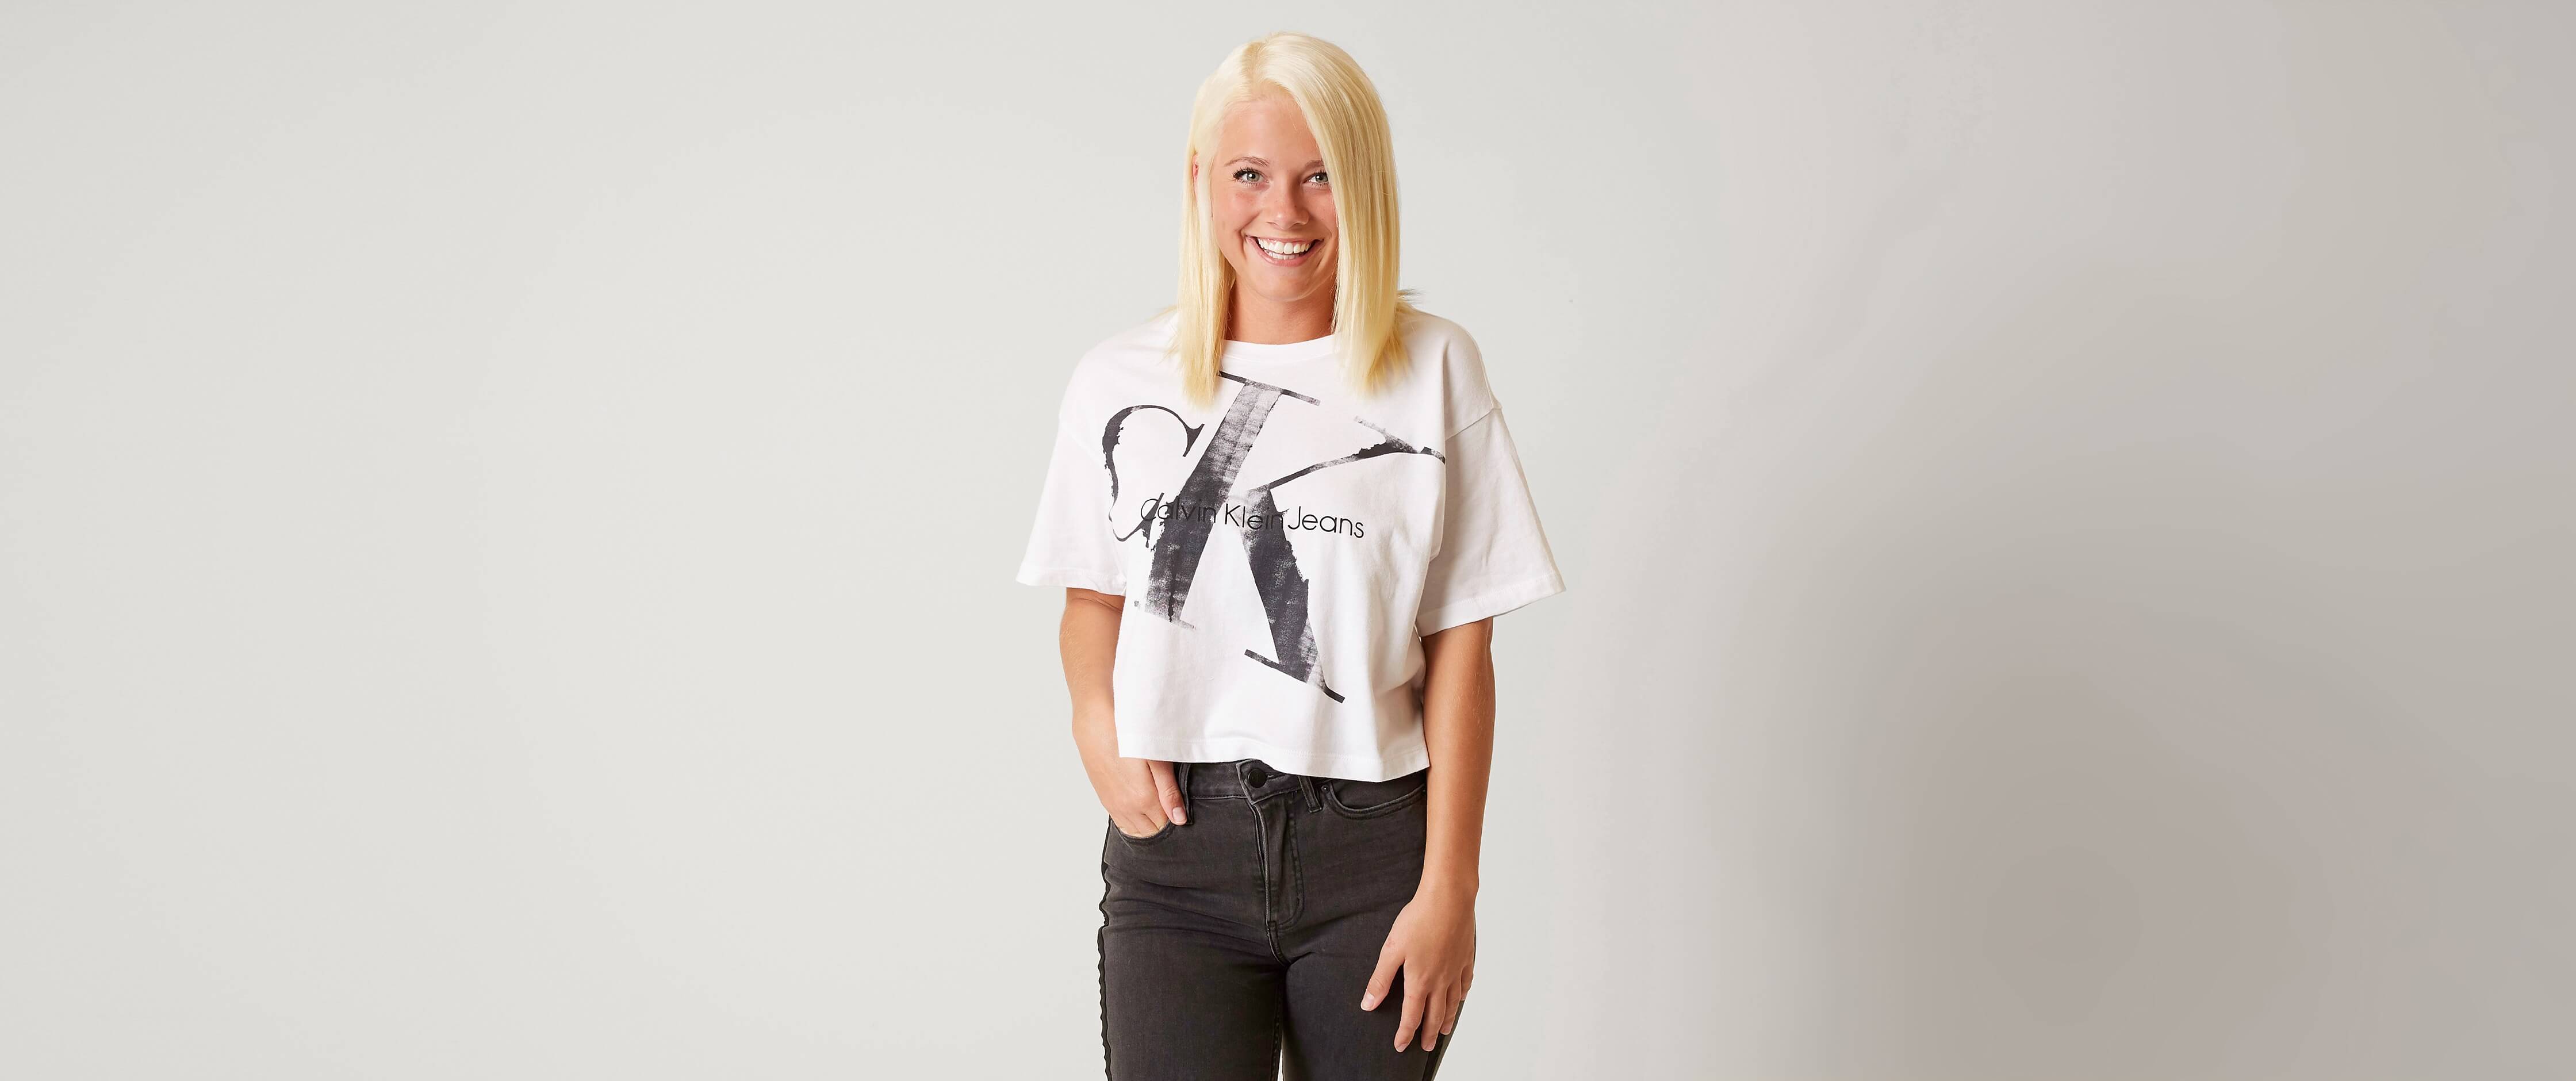 ck t shirts for womens